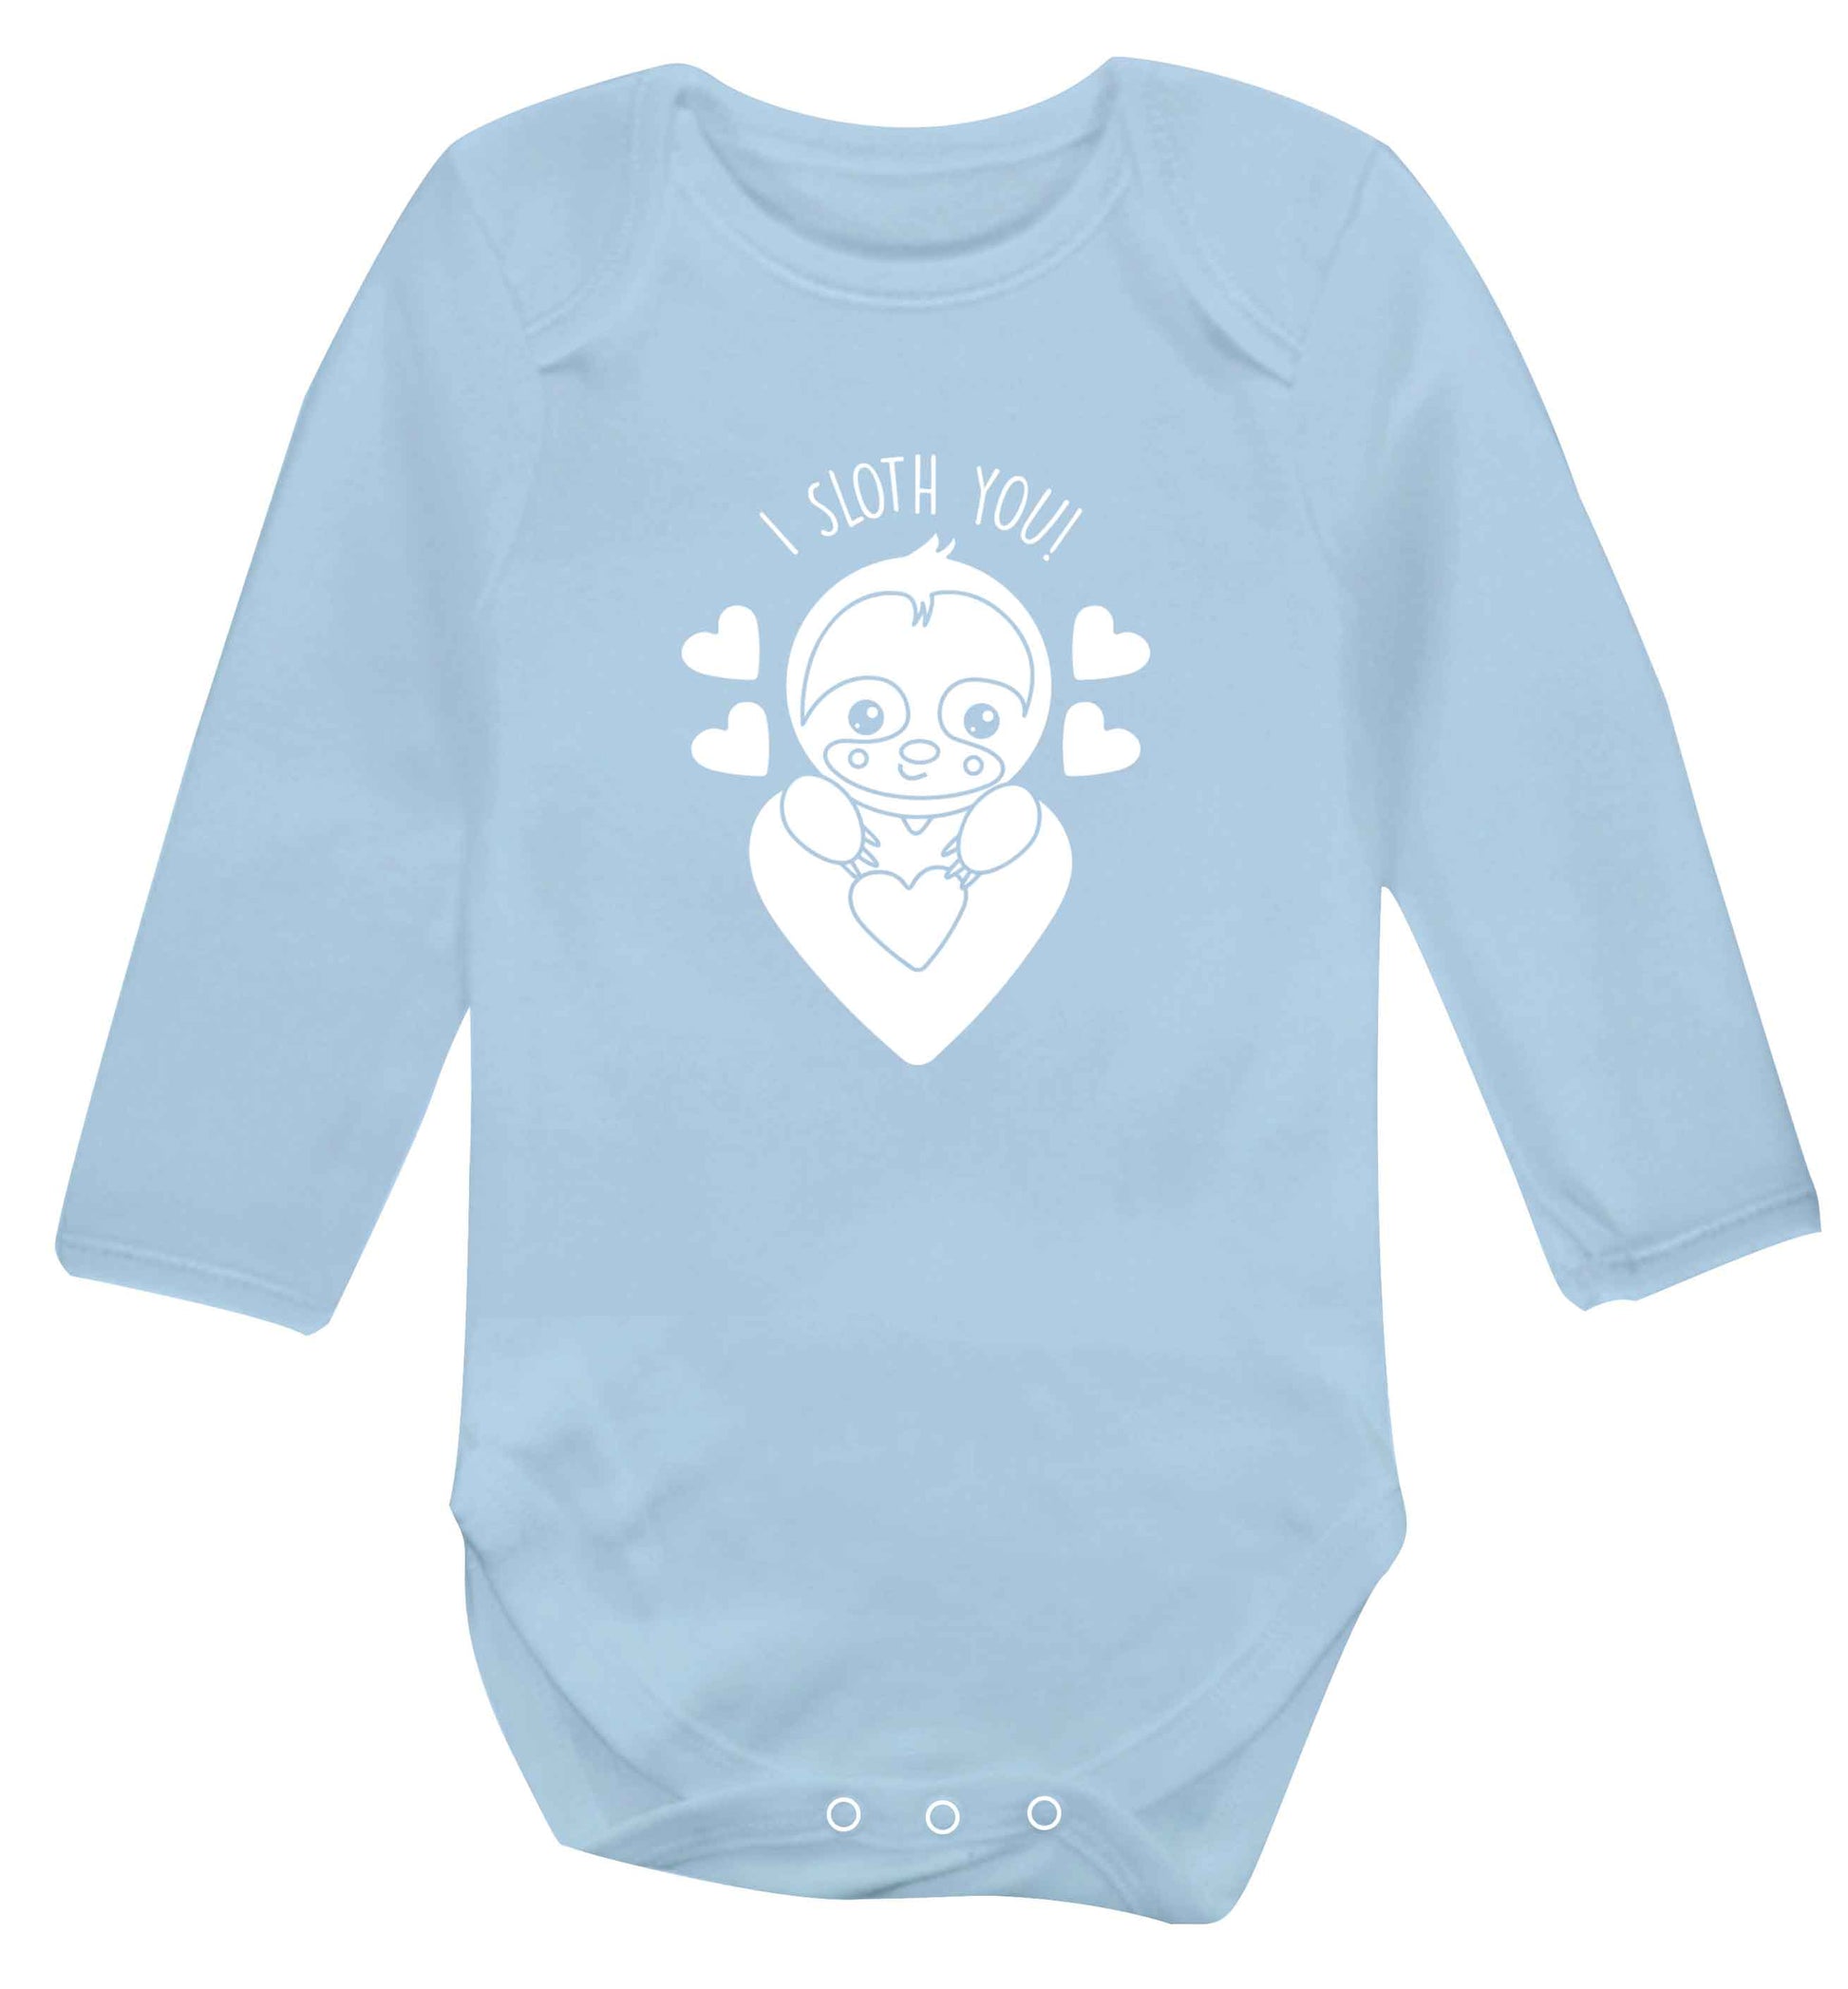 I sloth you baby vest long sleeved pale blue 6-12 months